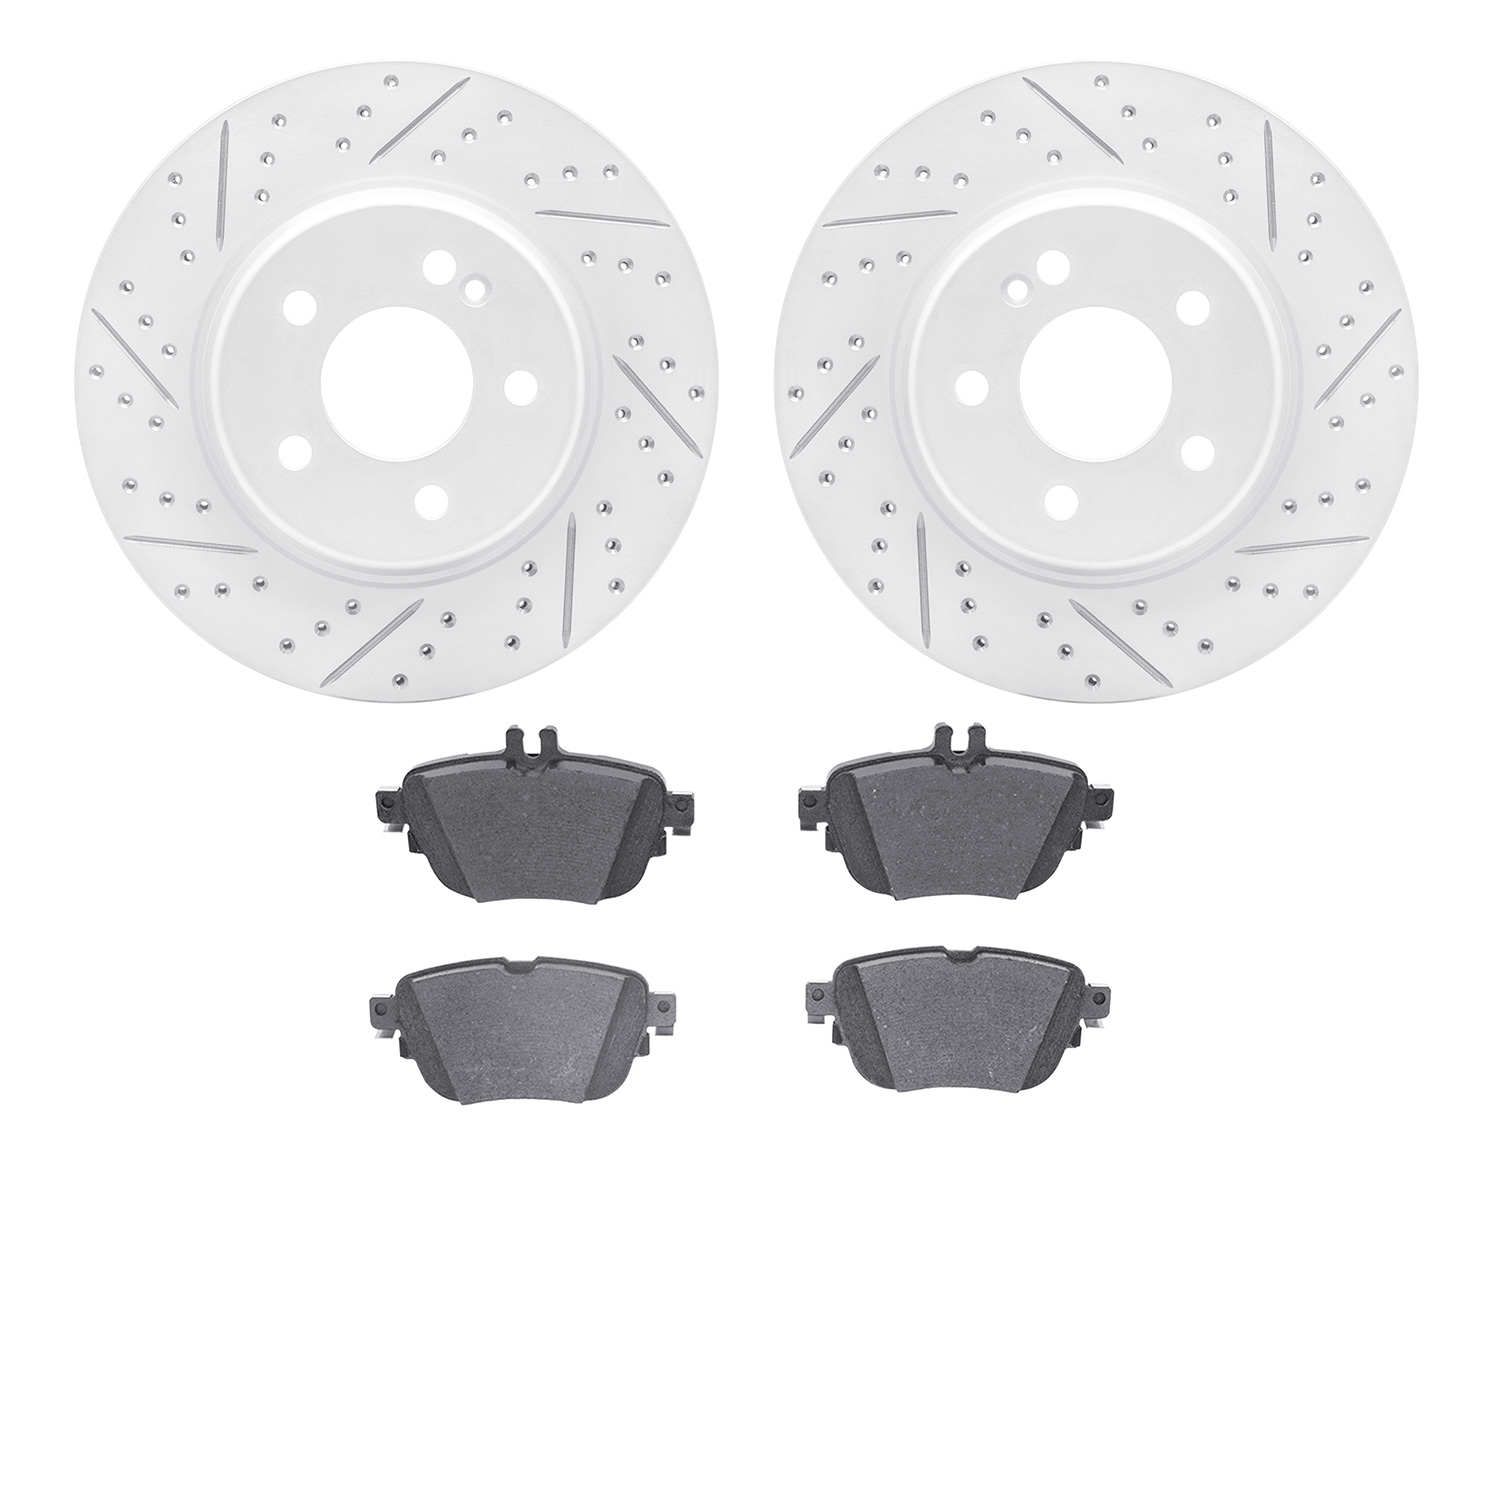 2502-63049 Geoperformance Drilled/Slotted Rotors w/5000 Advanced Brake Pads Kit, Fits Select Mercedes-Benz, Position: Rear